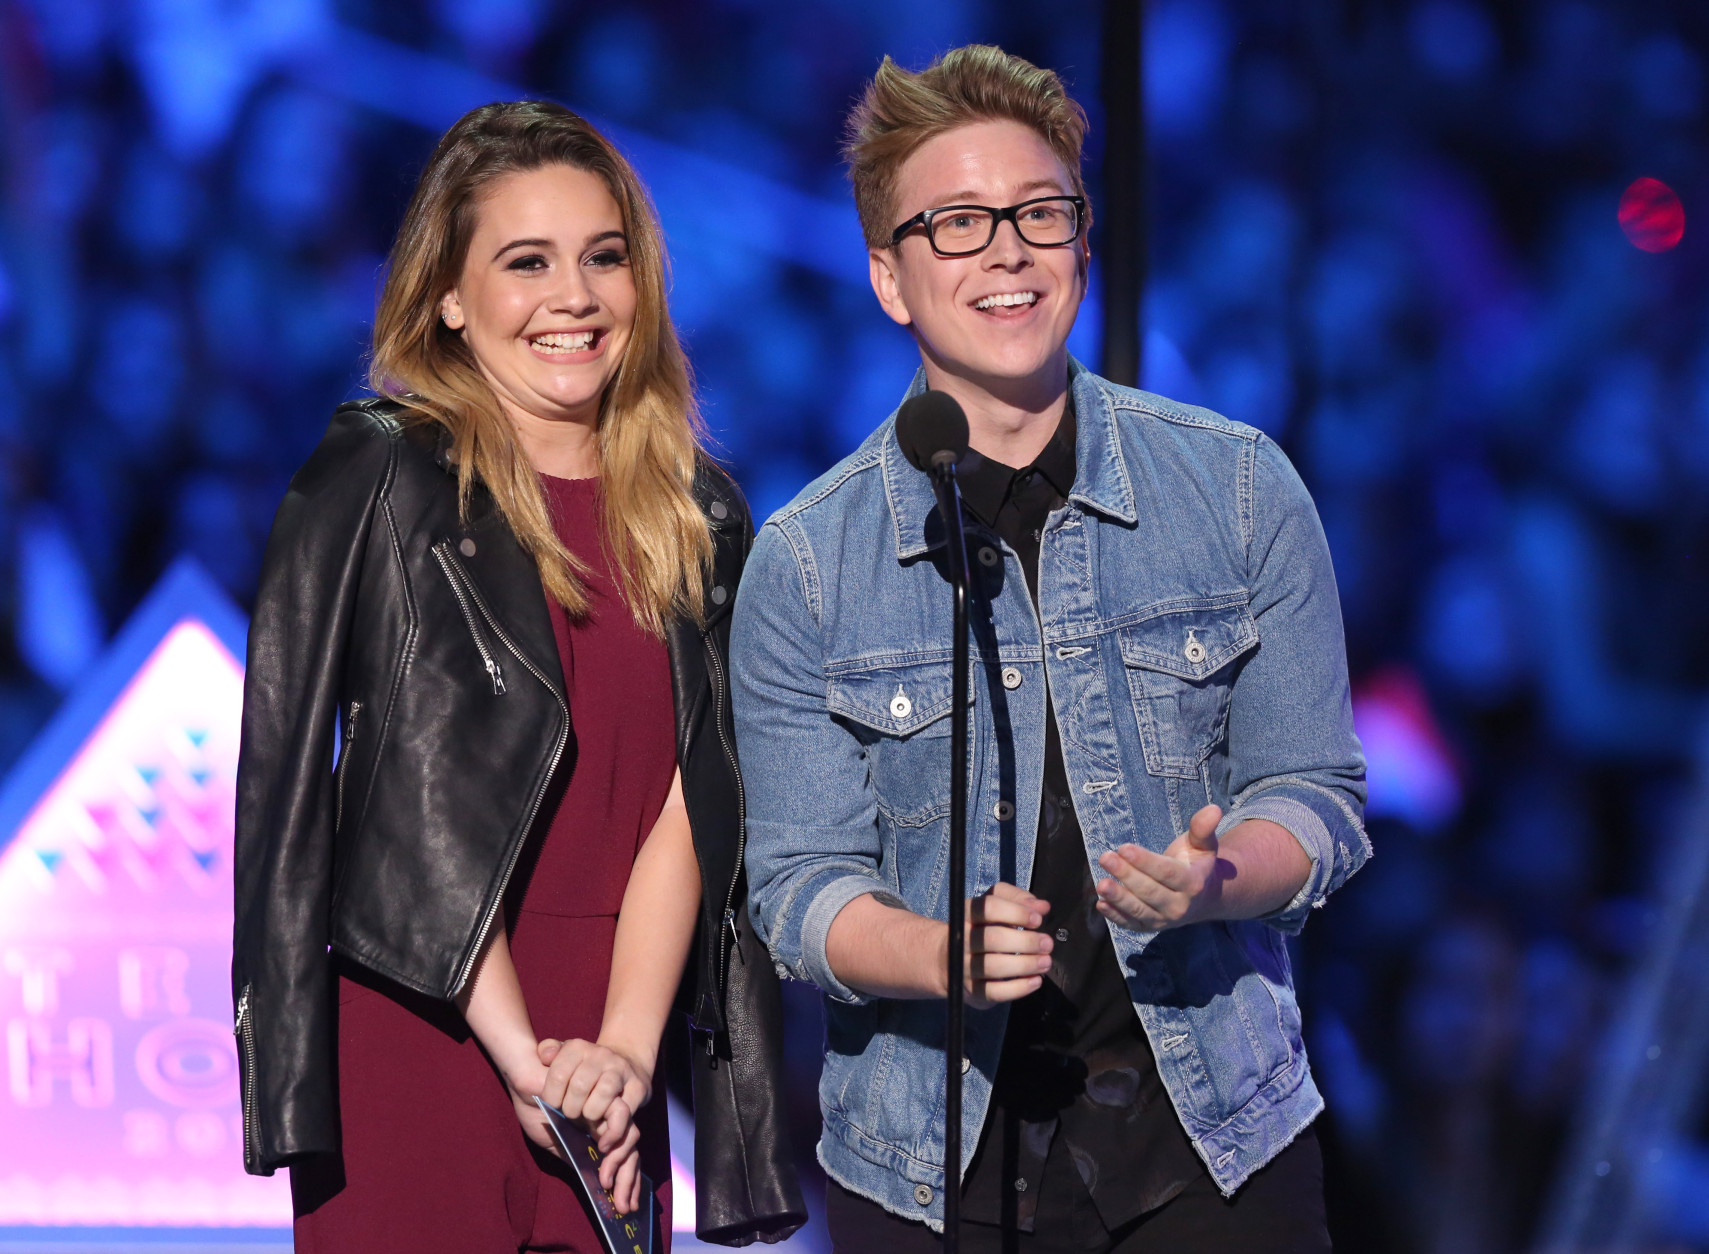 Bea Miller, left, and Tyler Oakley present the choice tv: drama award at the Teen Choice Awards at the Galen Center on Sunday, Aug. 16, 2015, in Los Angeles. (Photo by Matt Sayles/Invision/AP)